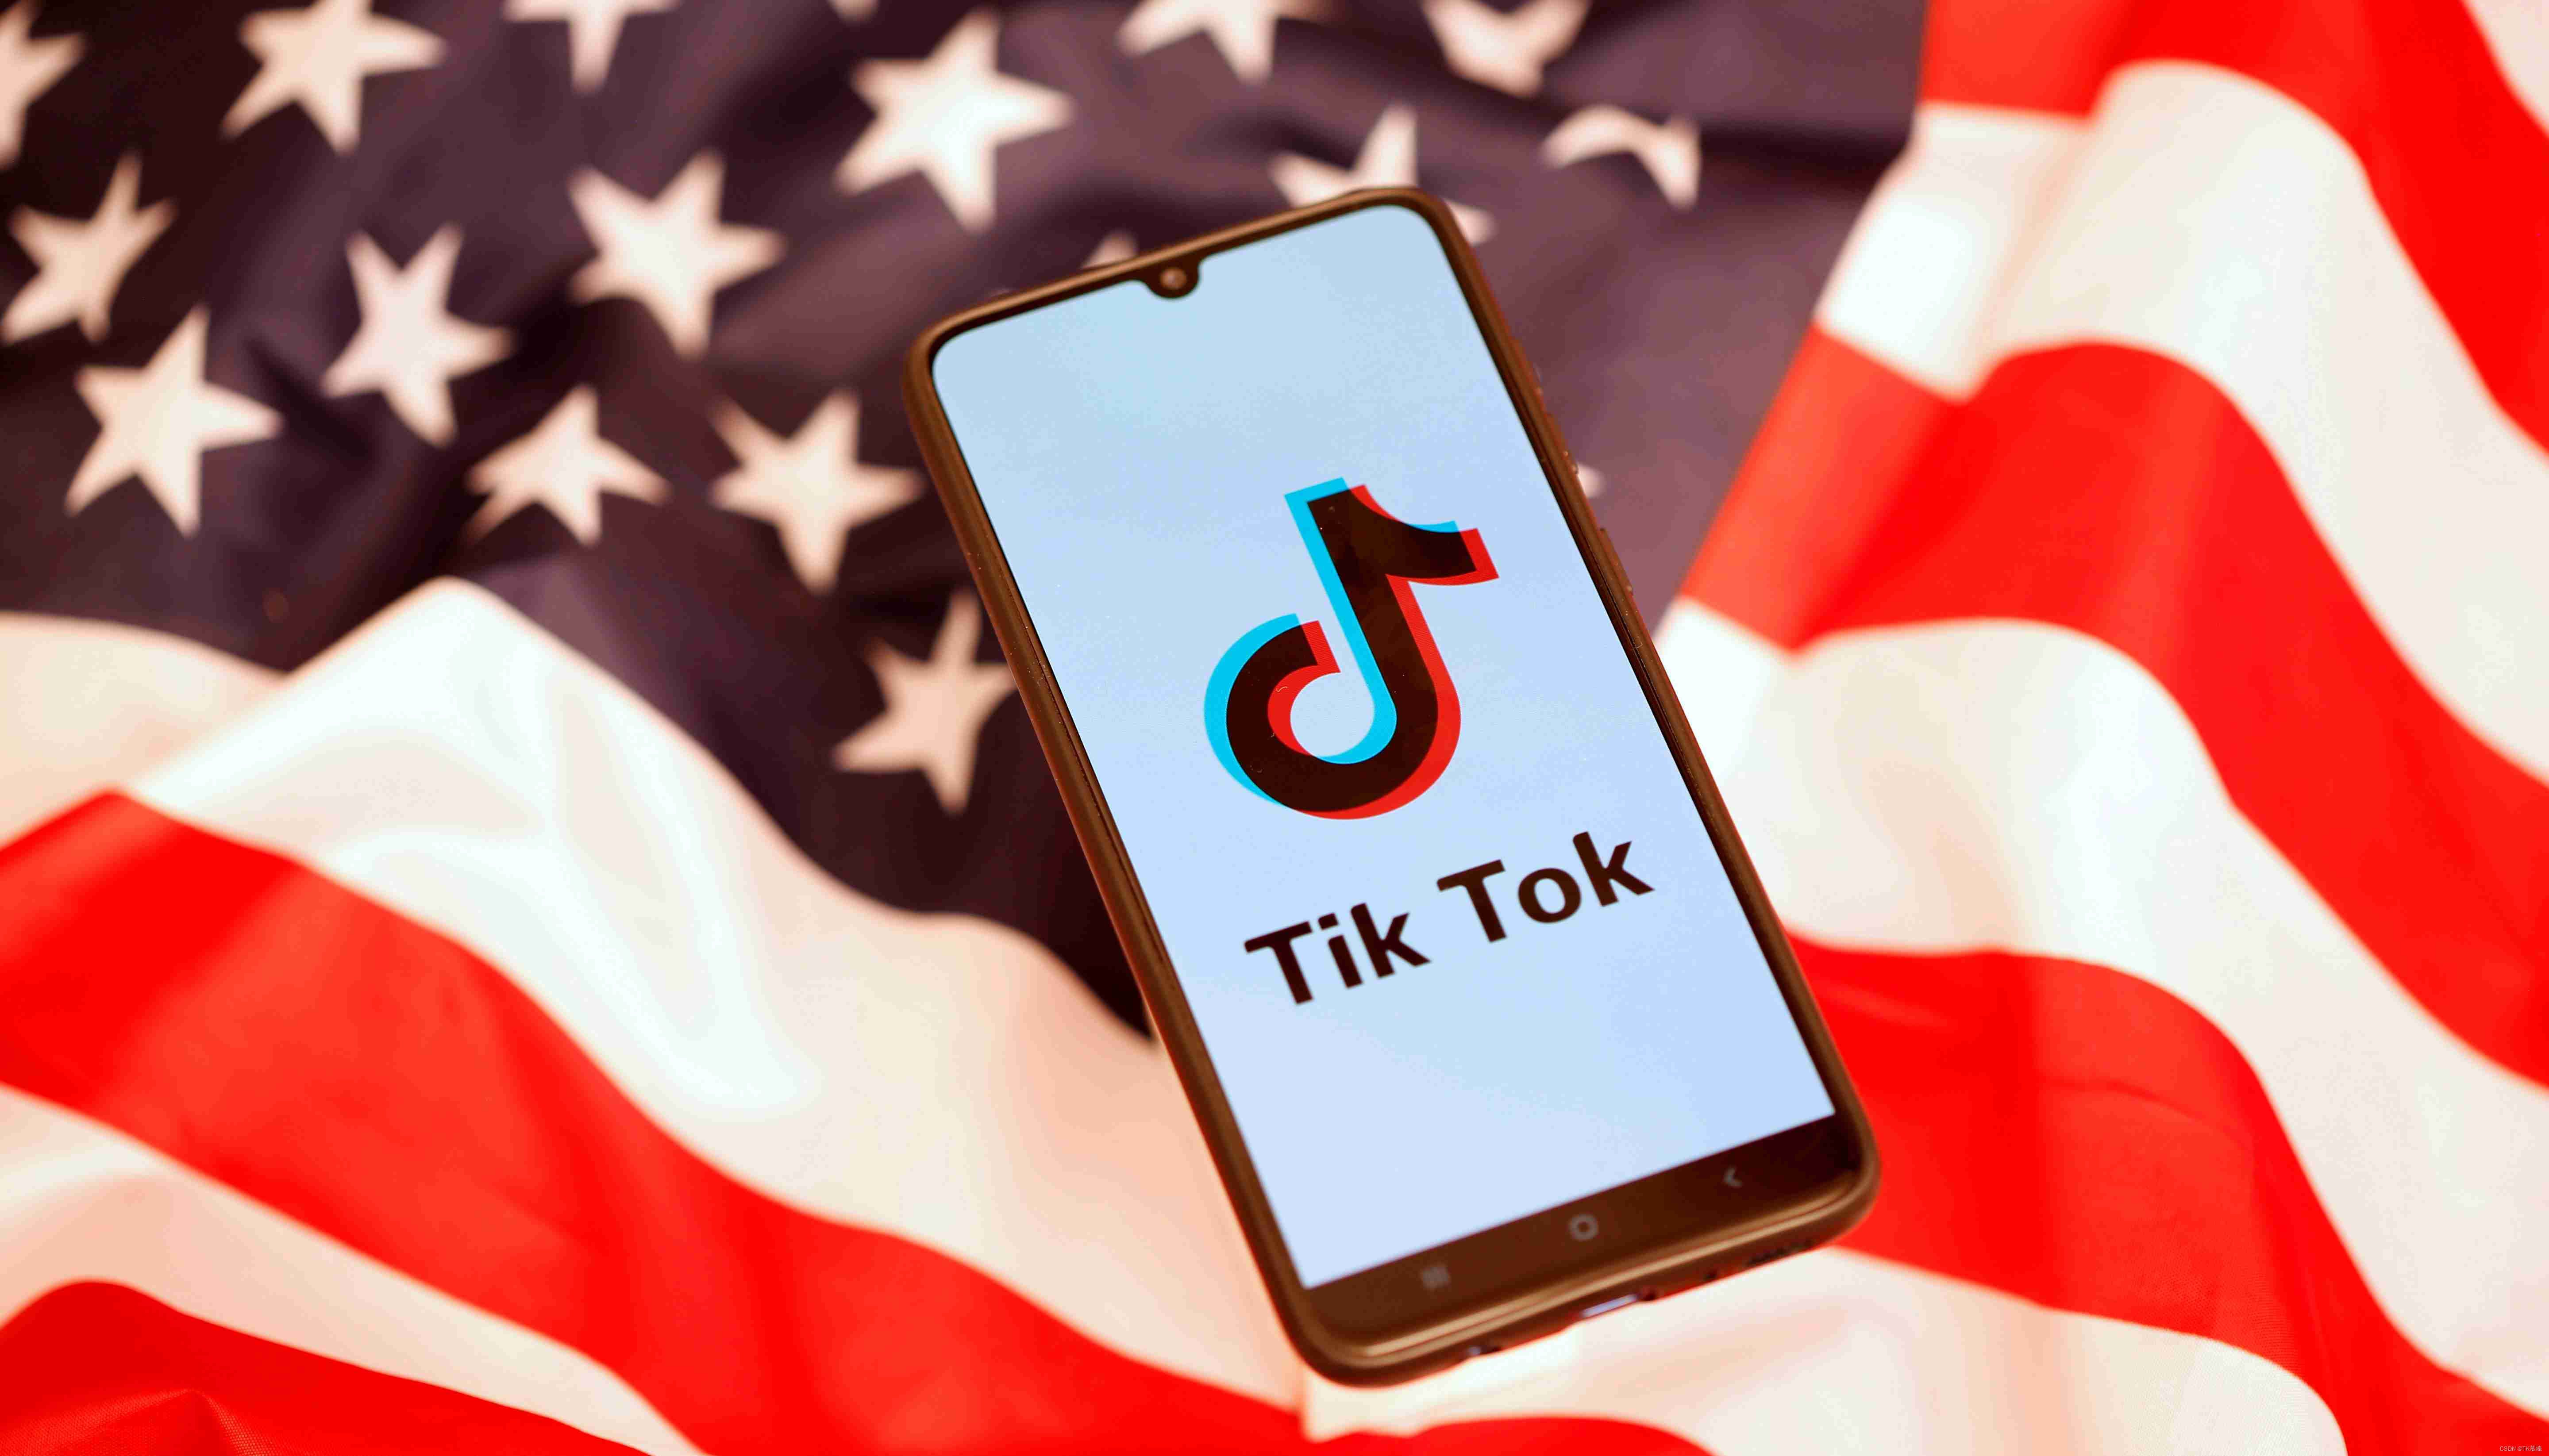 U.S. House Resolves to Issue Ban on TikTok